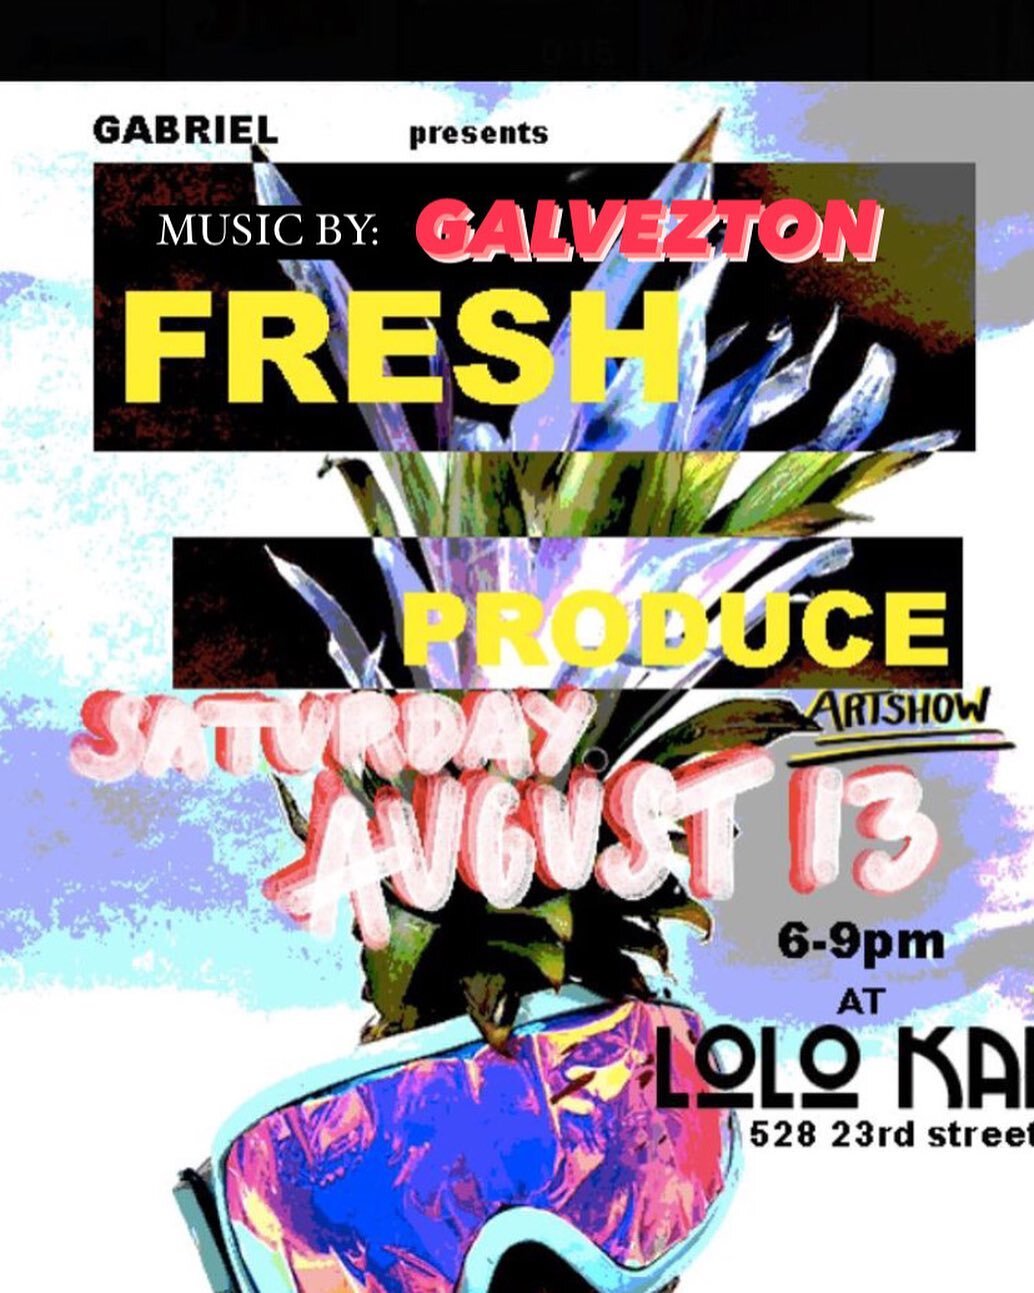 Stoked to play some music for this art show by the one and only @gapsmack87 .
Come getcho #freshproduce @lolokaigalveston #artmusic #surfculture #ilikewaves #galvezton